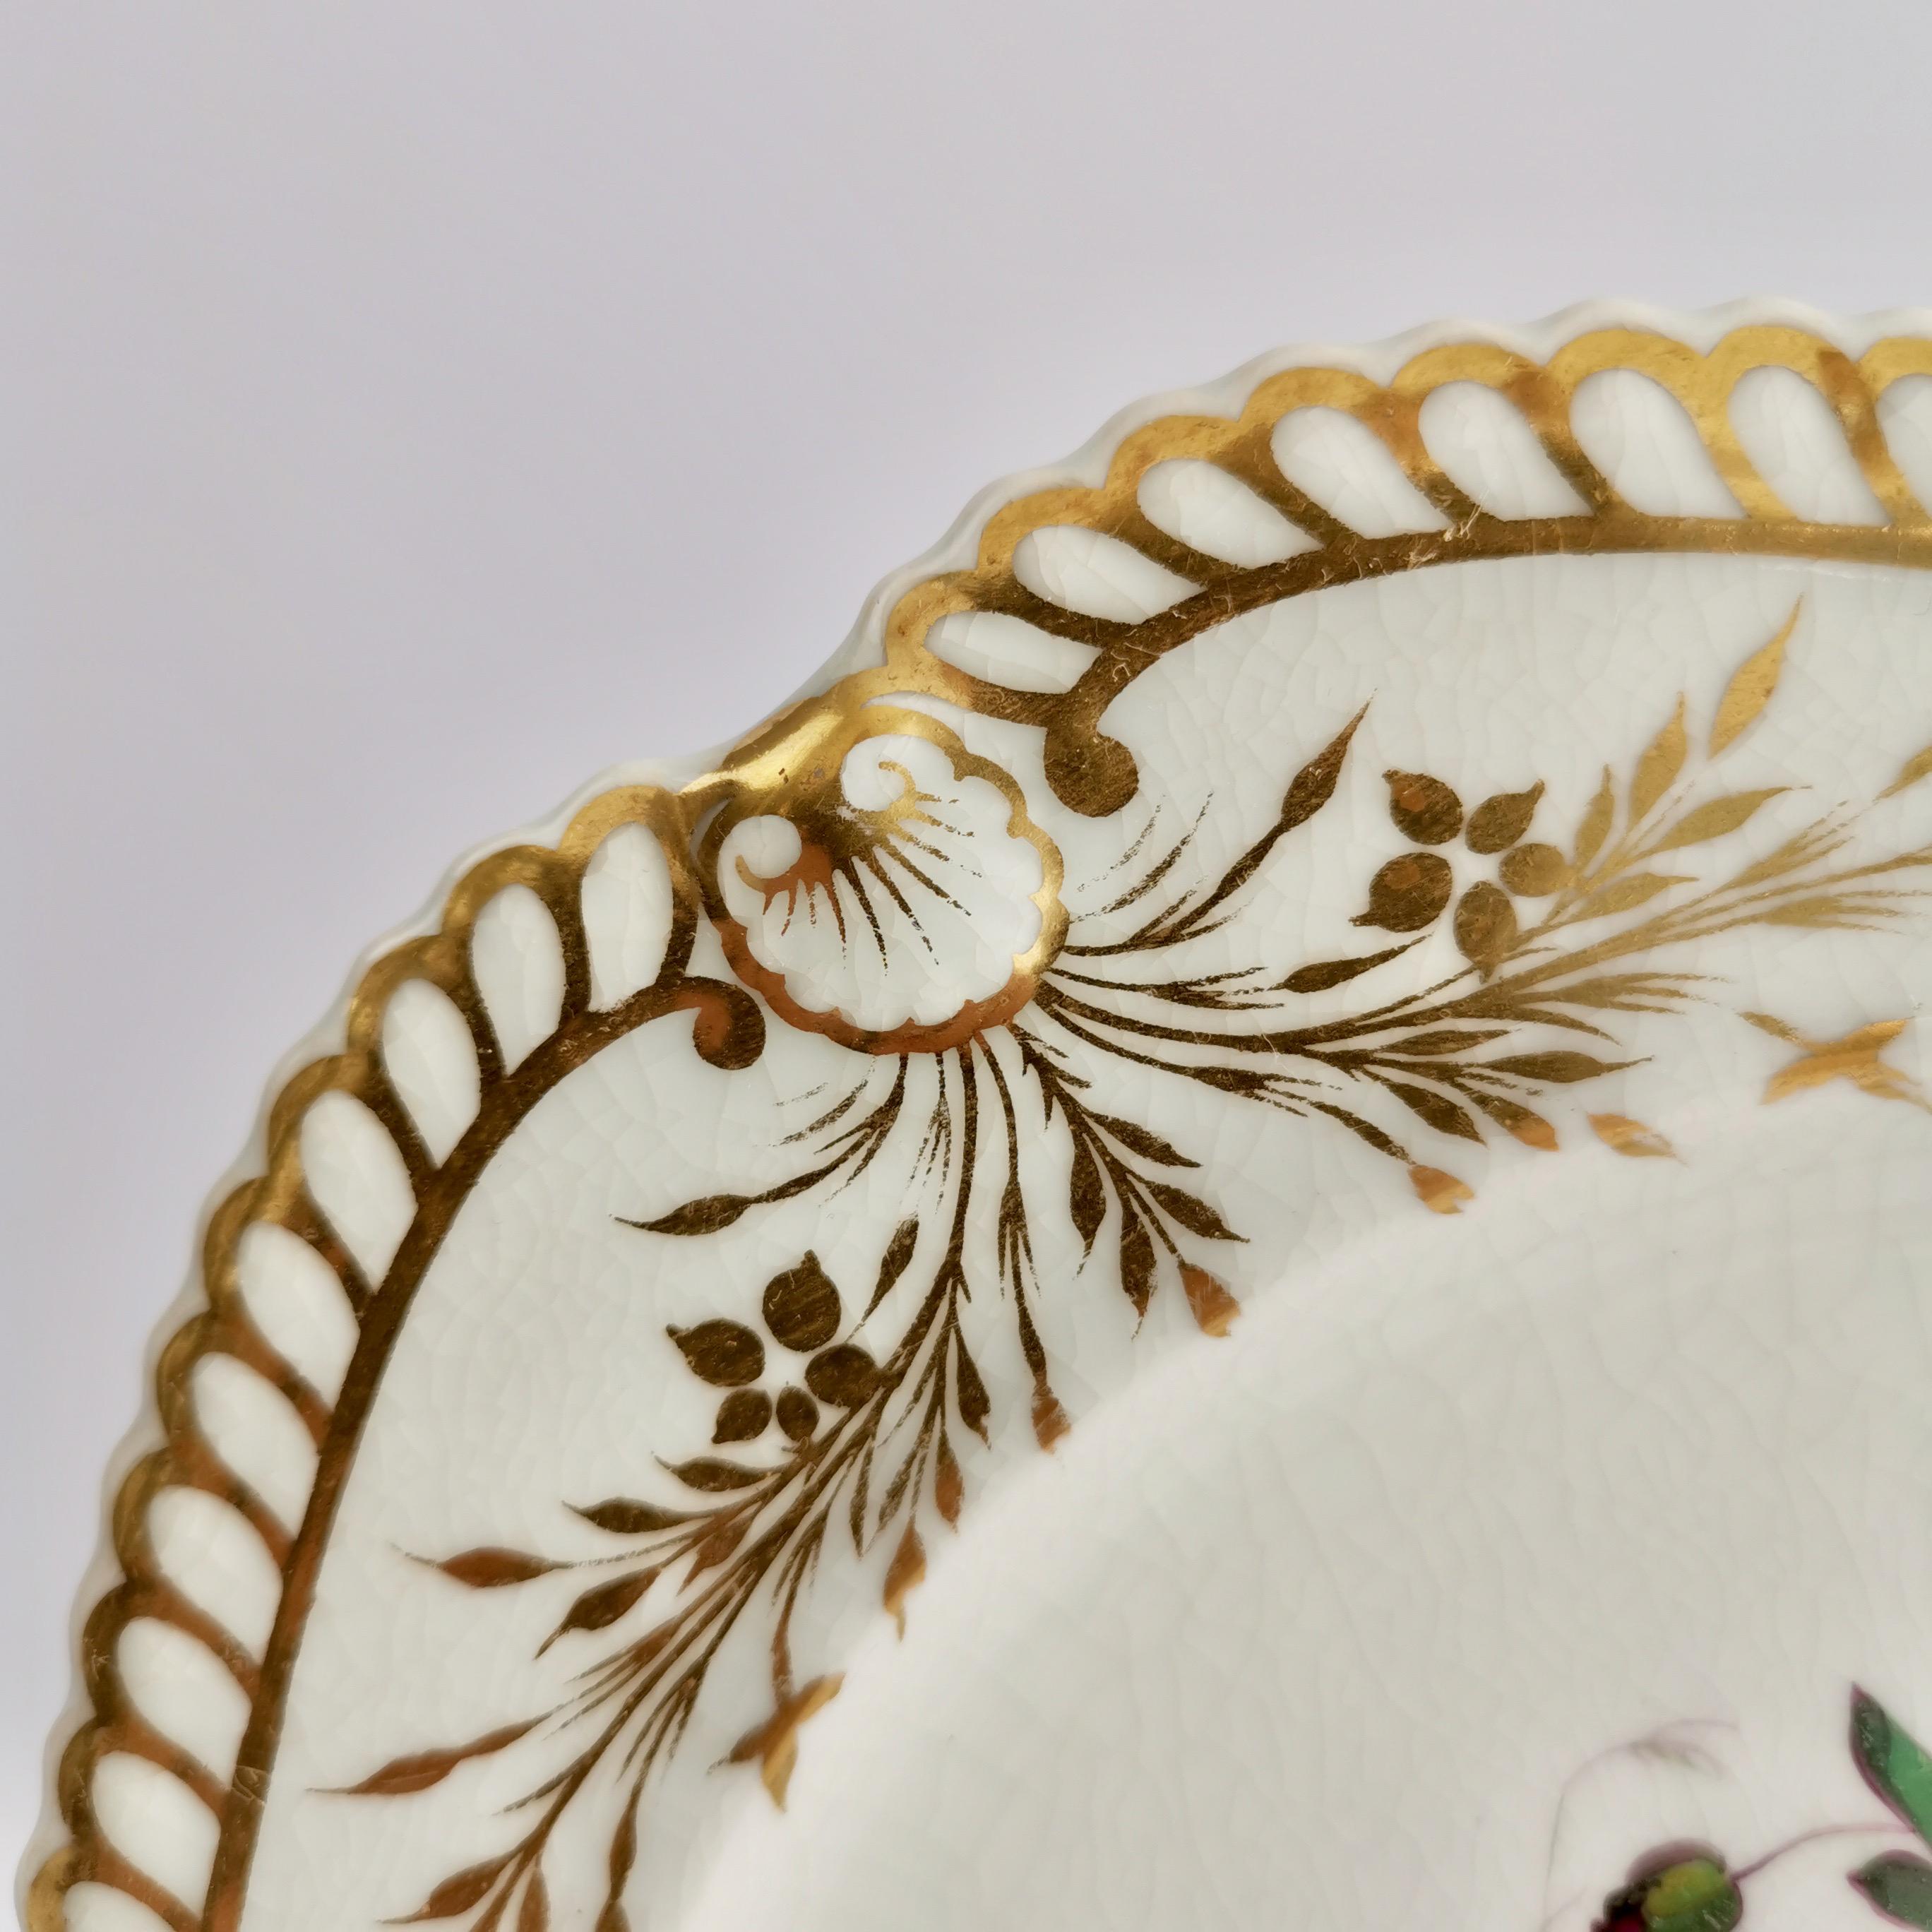 Hand-Painted Chamberlains Worcester Porcelain Plate, White with Flowers, Regency ca 1822 '1'